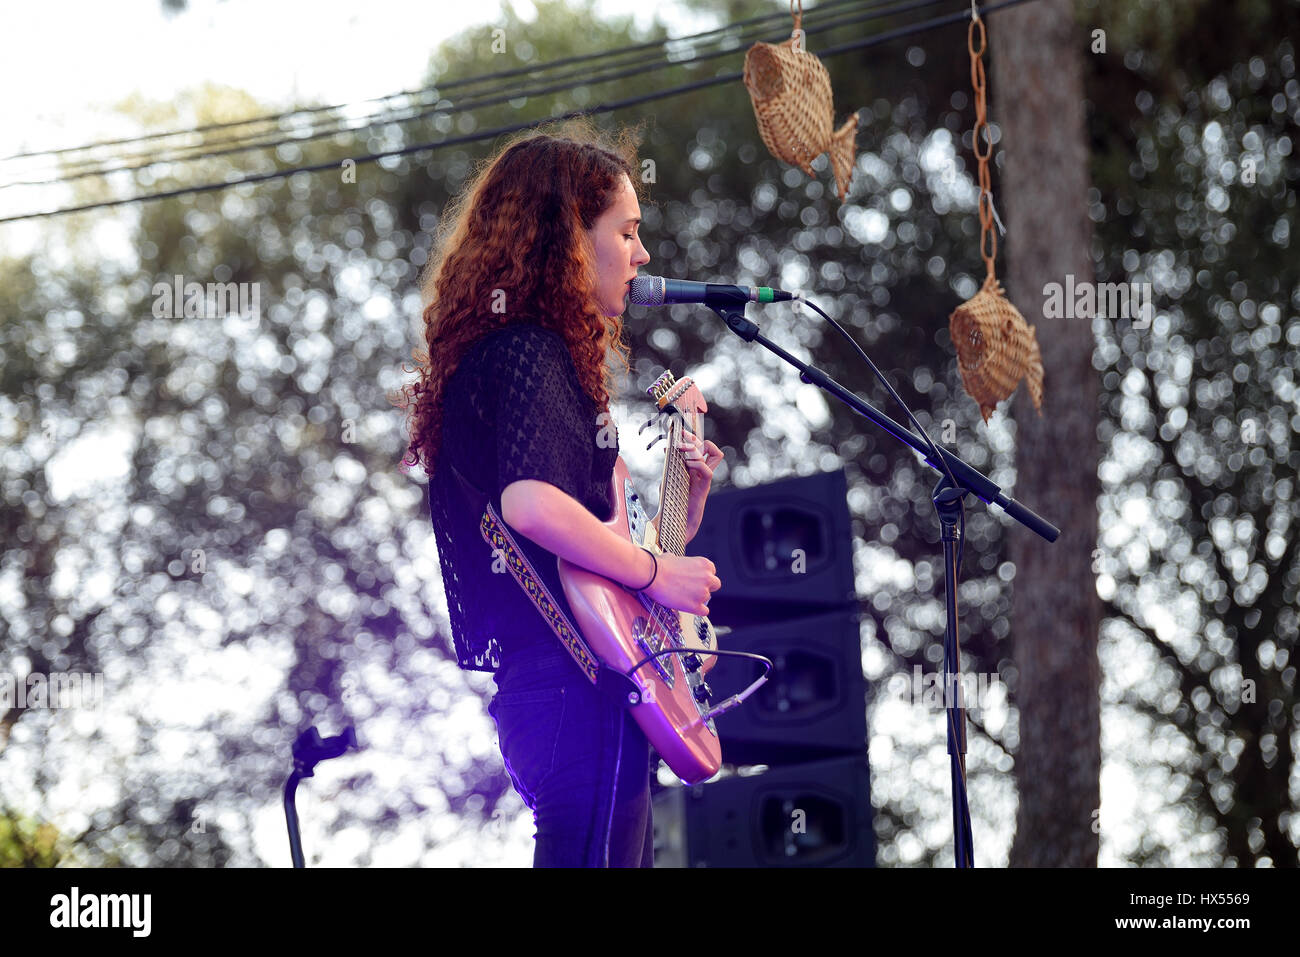 BARCELONA - JUL 4: Nuria Graham (singer and guitarist from Vic) performs at Vida Festival on July 4, 2015 in Barcelona, Spain. Stock Photo